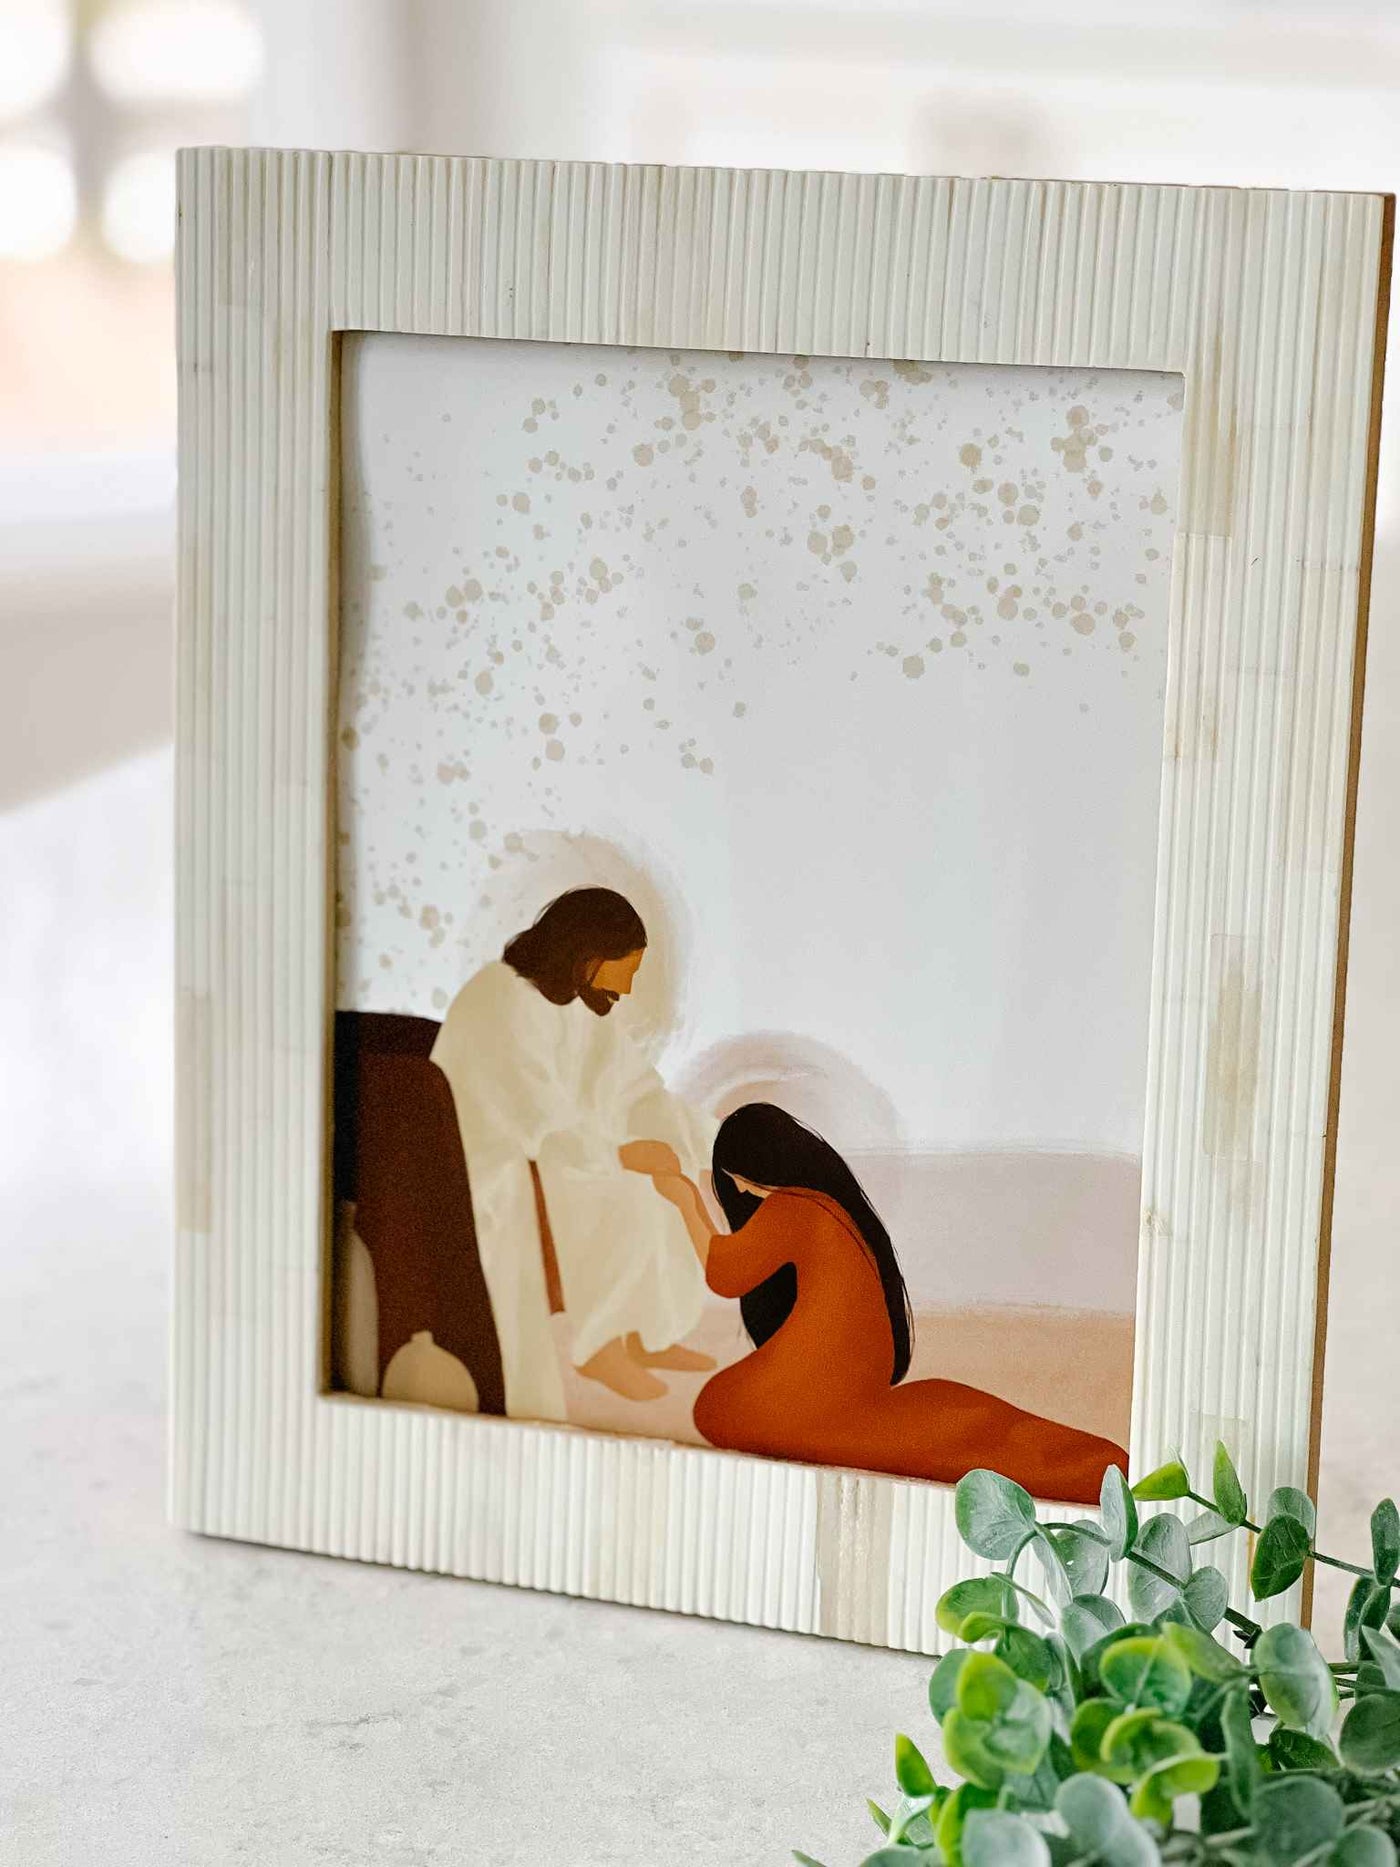 Jesus and Mary Magdalene - Print